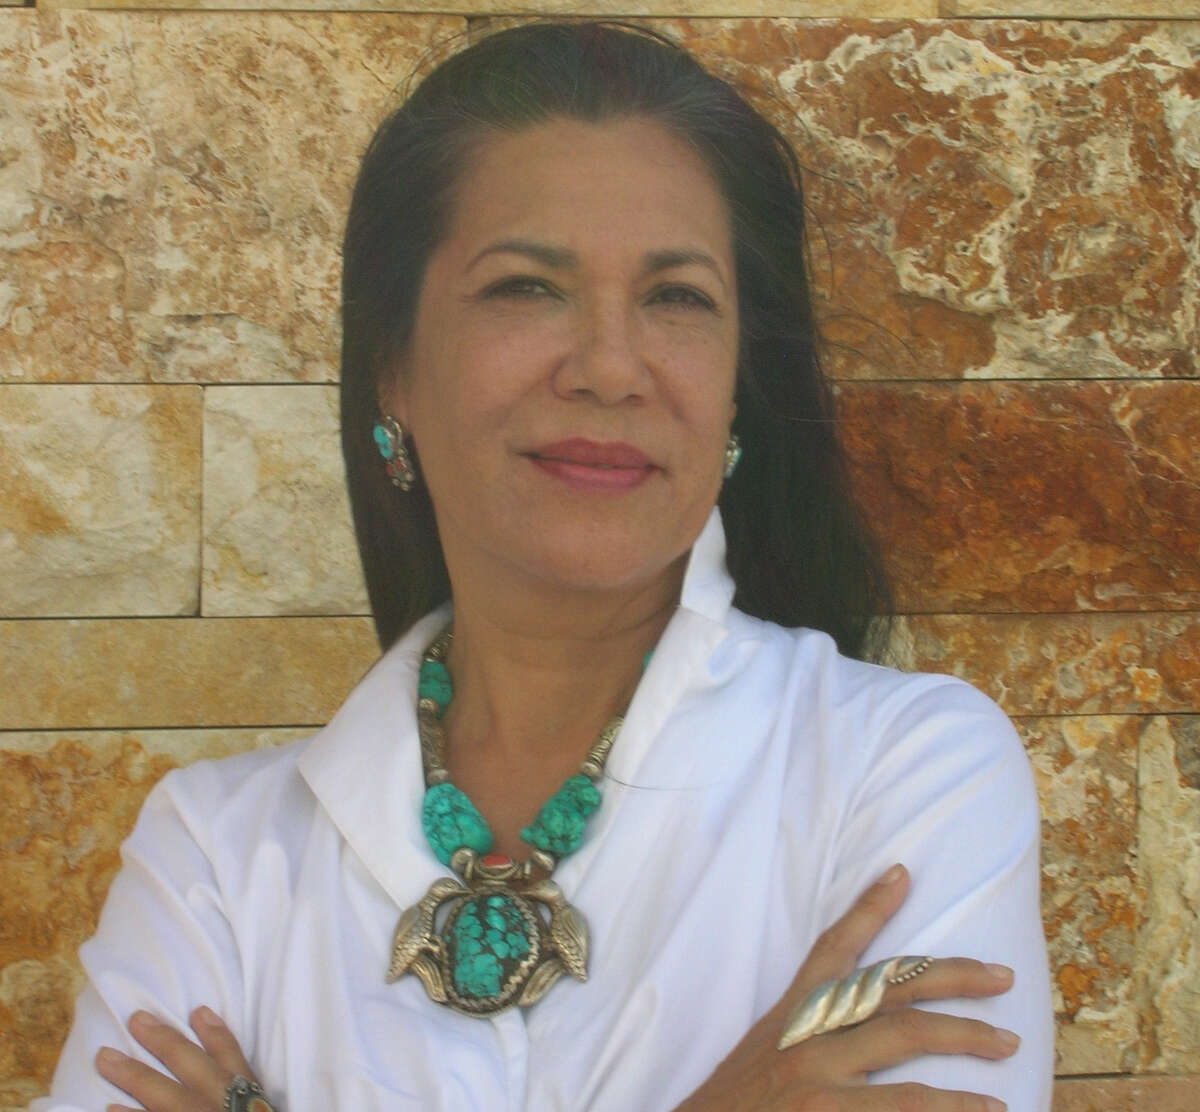 Author and cancer survivor Ana Castillo will be part of a special reading of her new book 7 p.m. Friday at Esperanza Peace and Center, 922 San Pedro. Castillo and fellow local writers Carmen Tafolla and Barbara Renaud Gonzalez each will discuss how the writing process helped while overcoming cancer. Call 228-0201 or visit www.esperanzacenter.org for details.